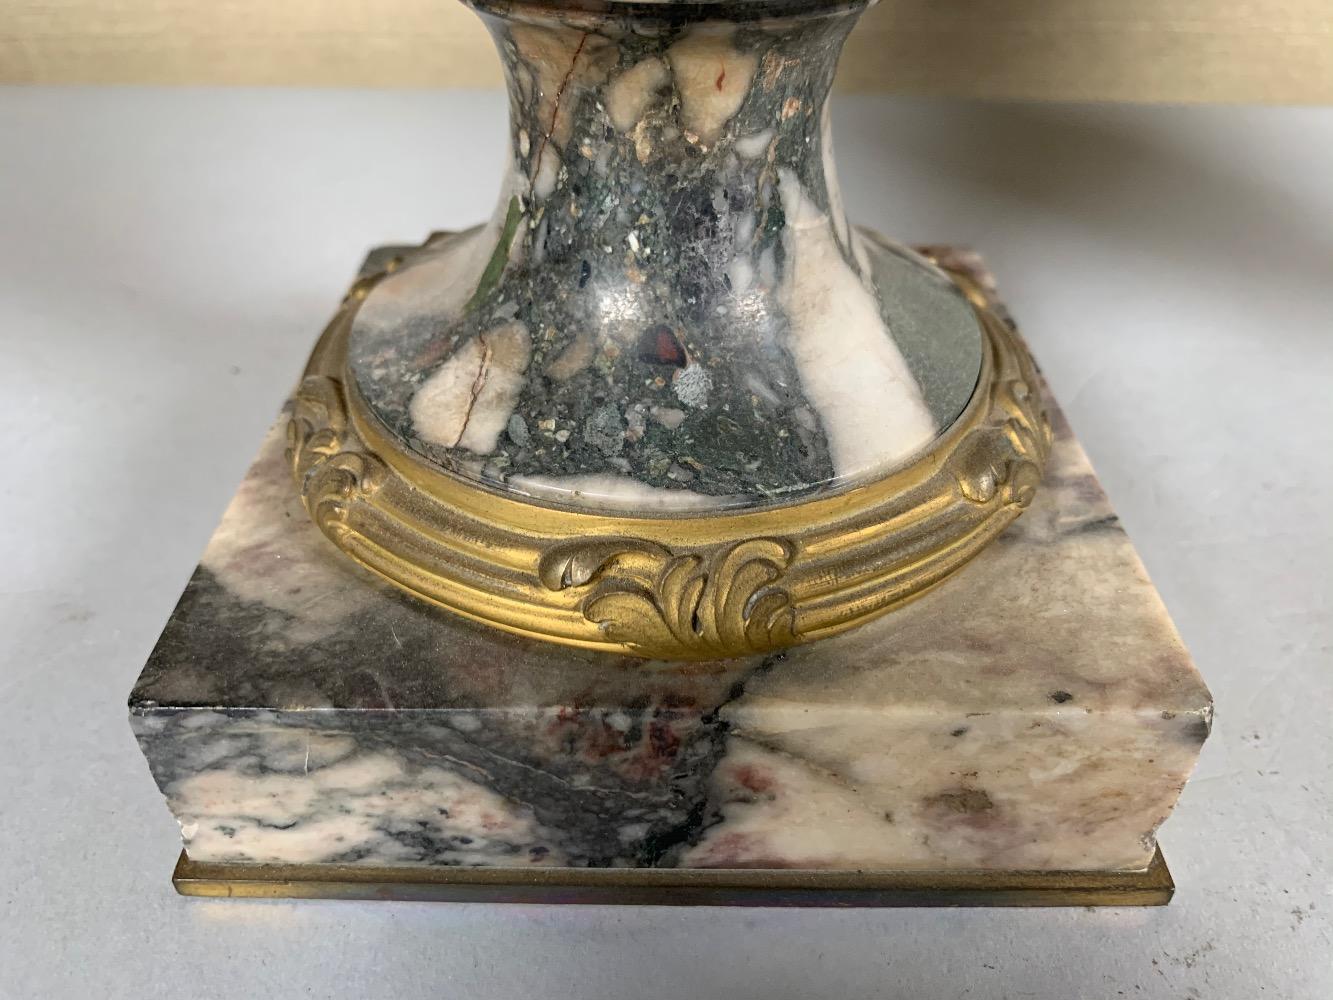 Pair of marble and gilded bronze vases.